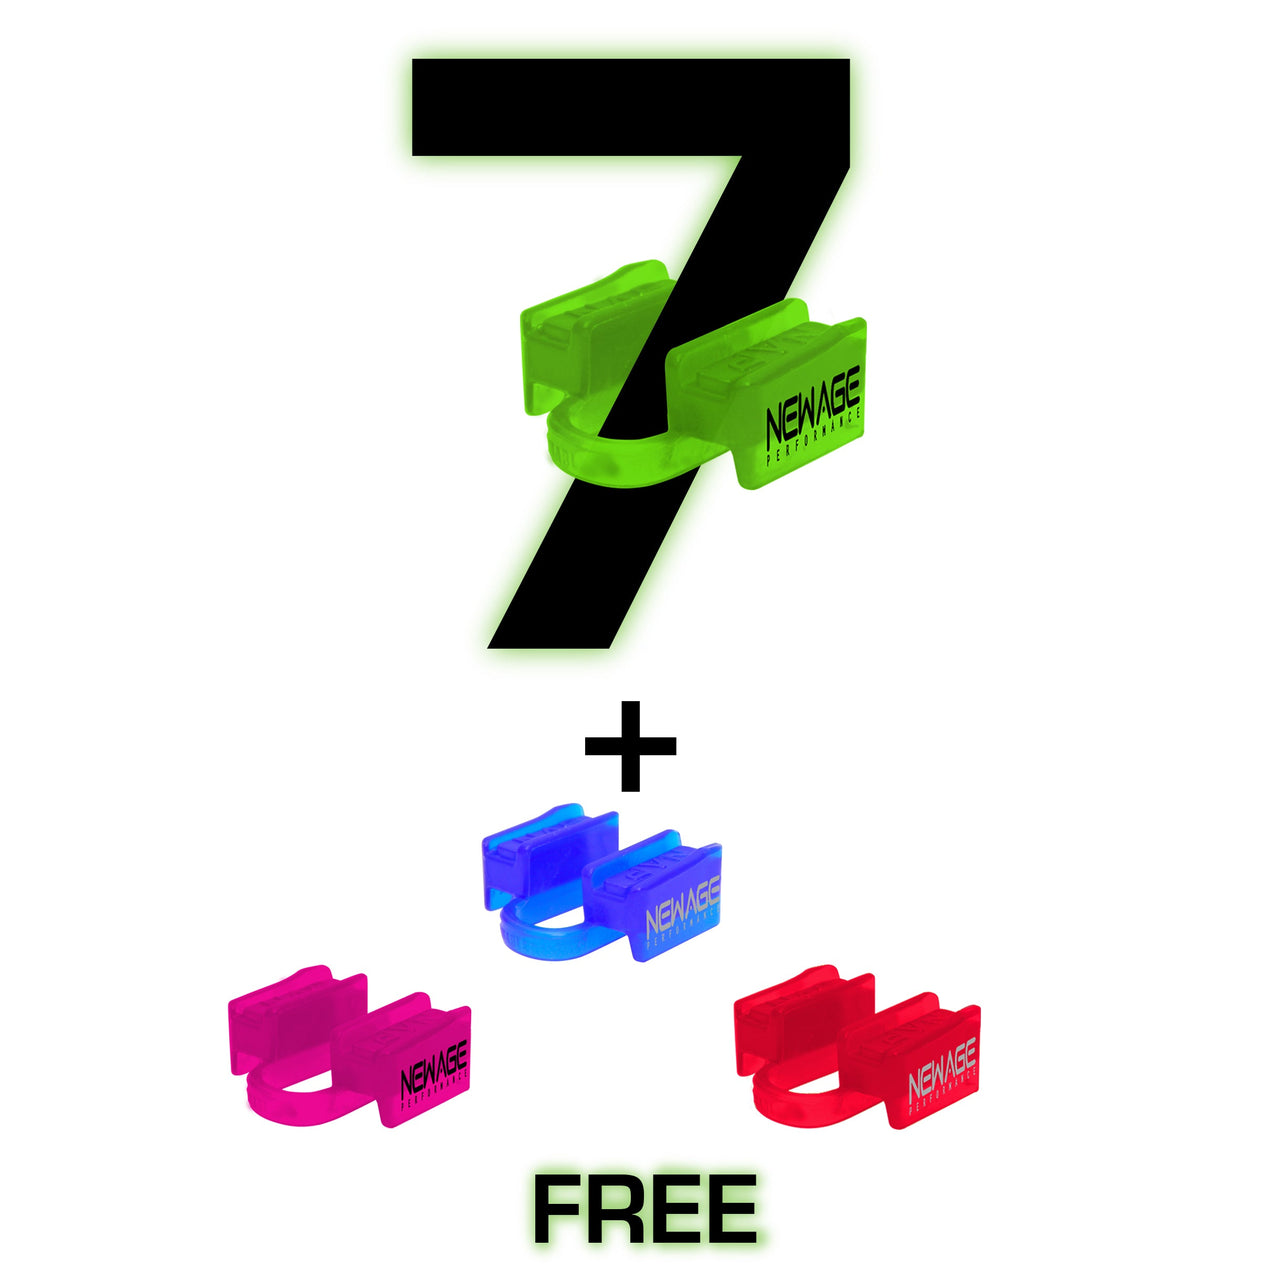 Special offer: Buy 7, Get 3 Free on mouthpieces or products.